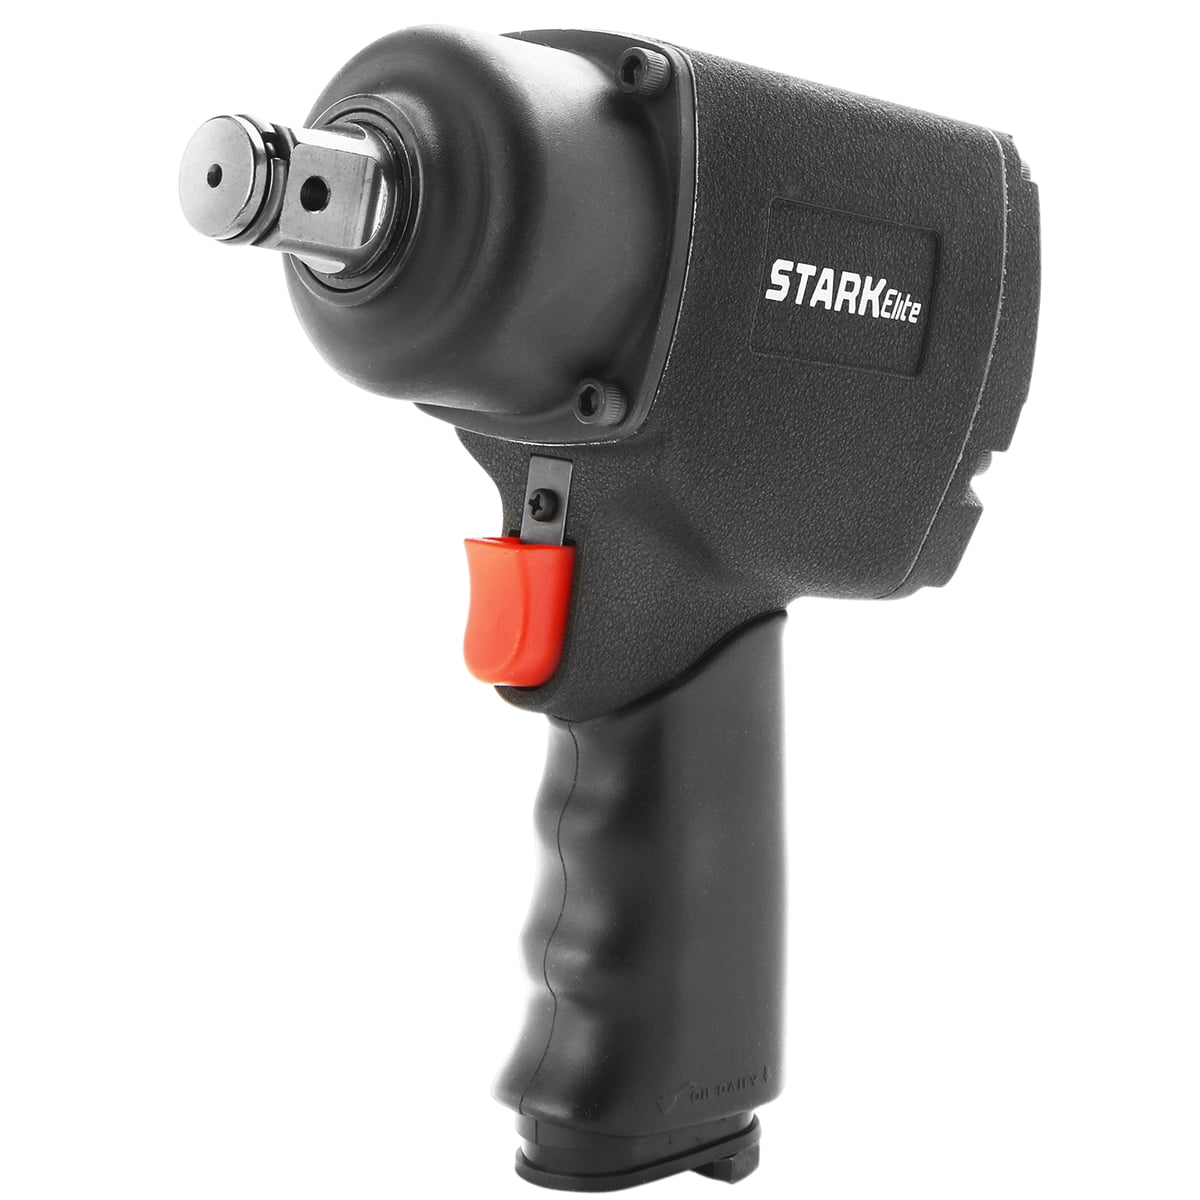 AIRCAT 1355-xl 3/8in Drive NitroCat Impact Wrench for sale online 